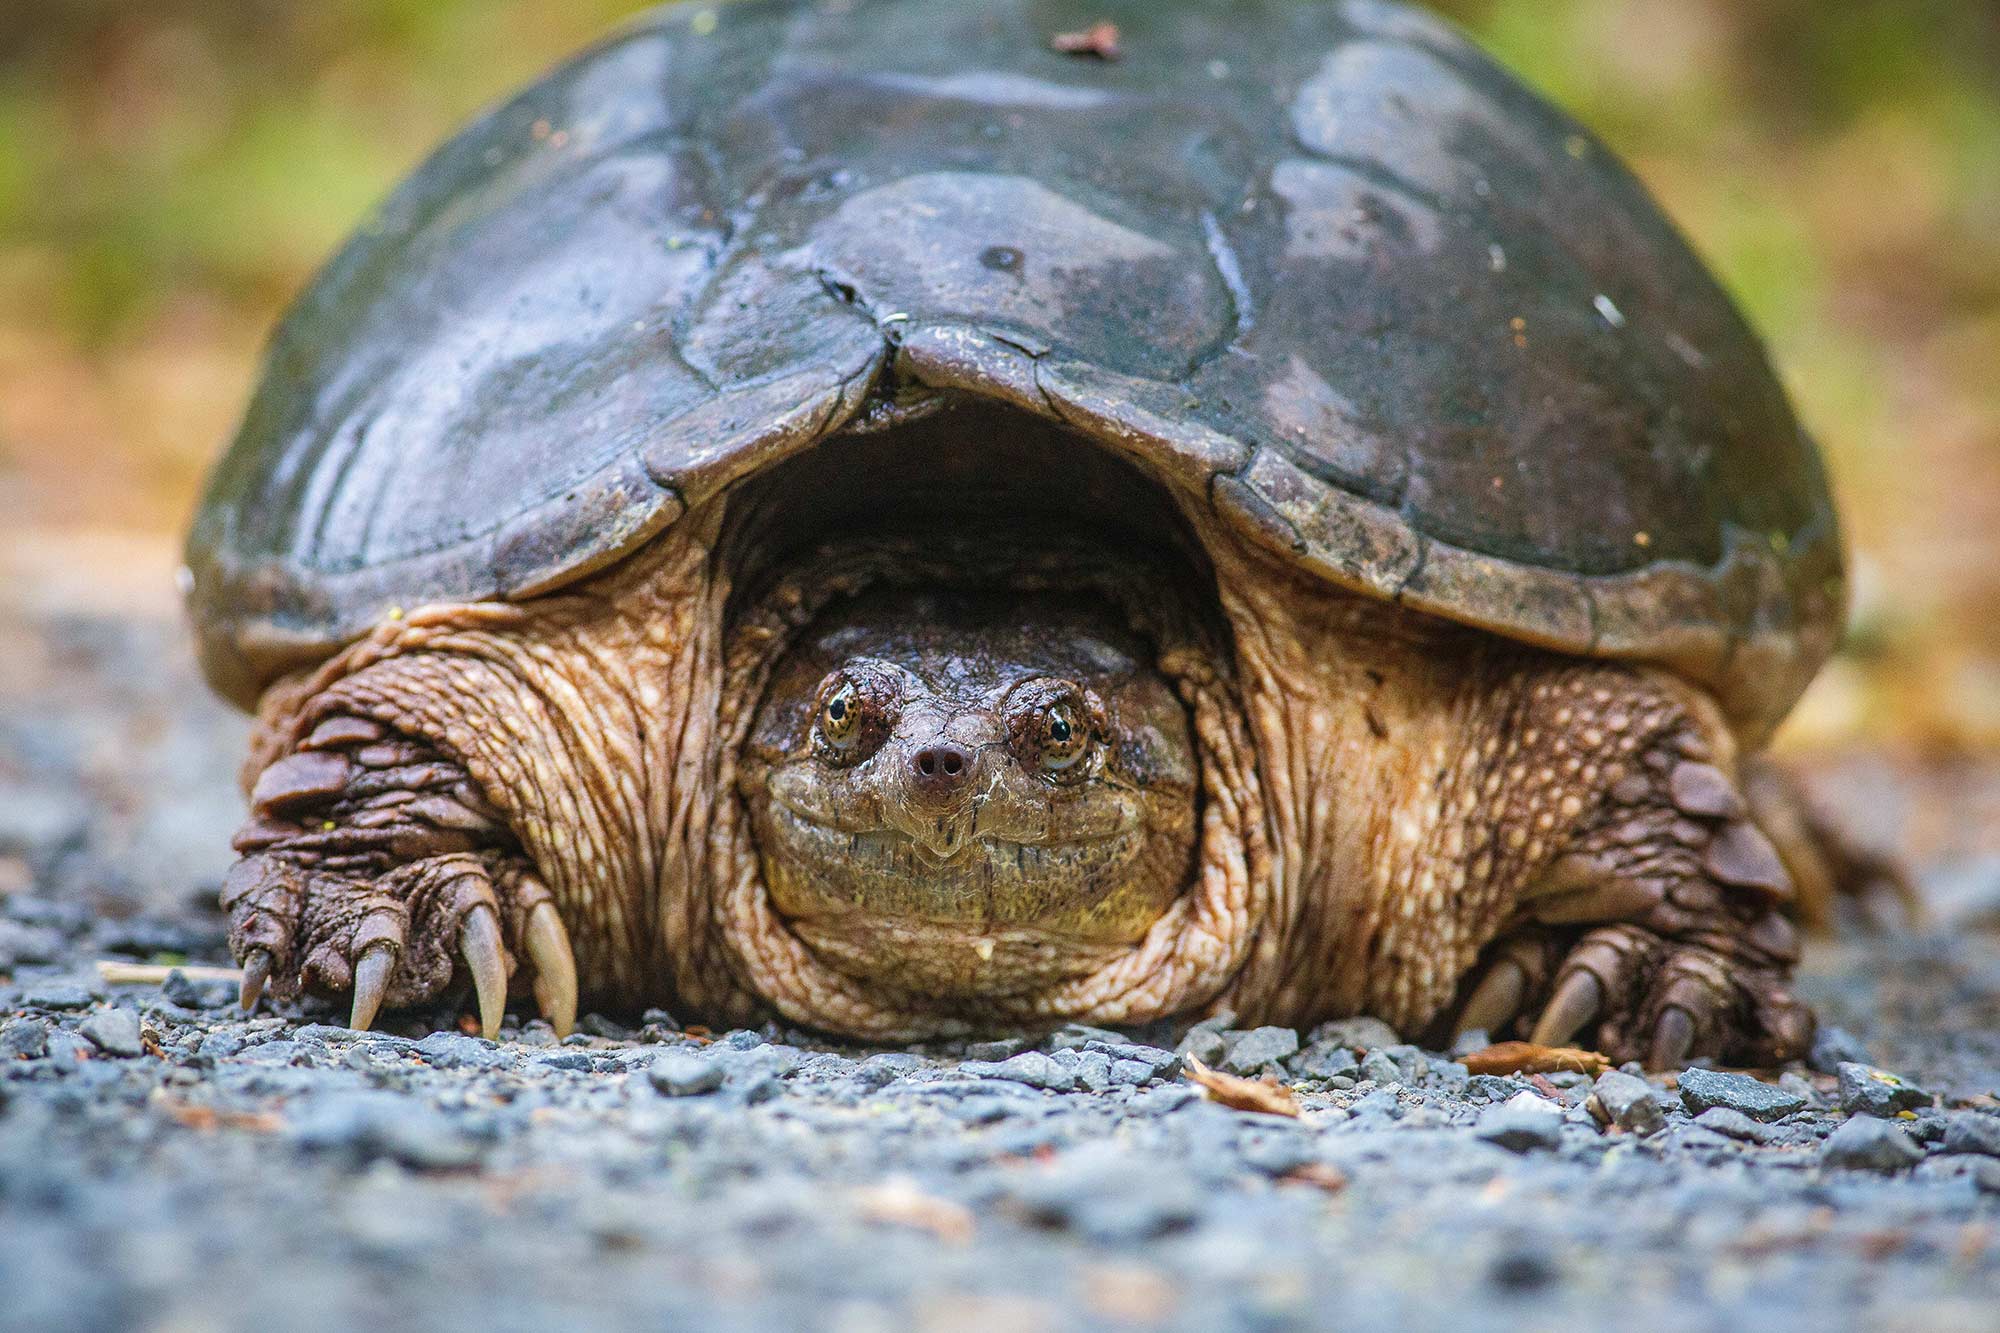 Giant Snapping Turtle, Avon, CT - 5/26/15